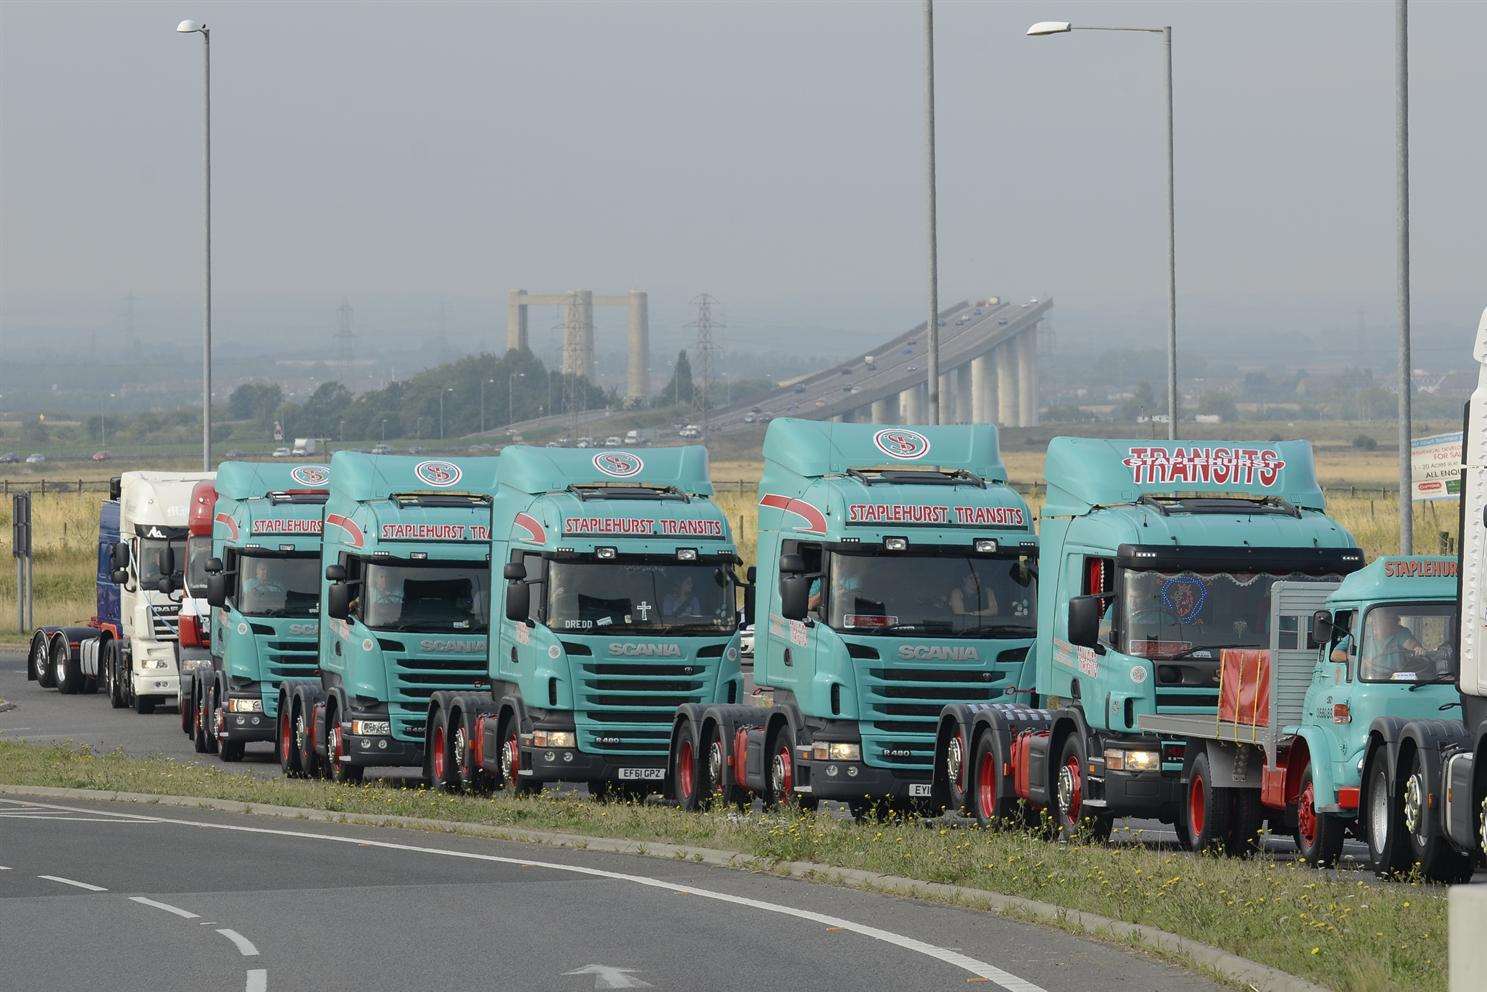 Lorries taking part in the Oliver Smith Truck Rally